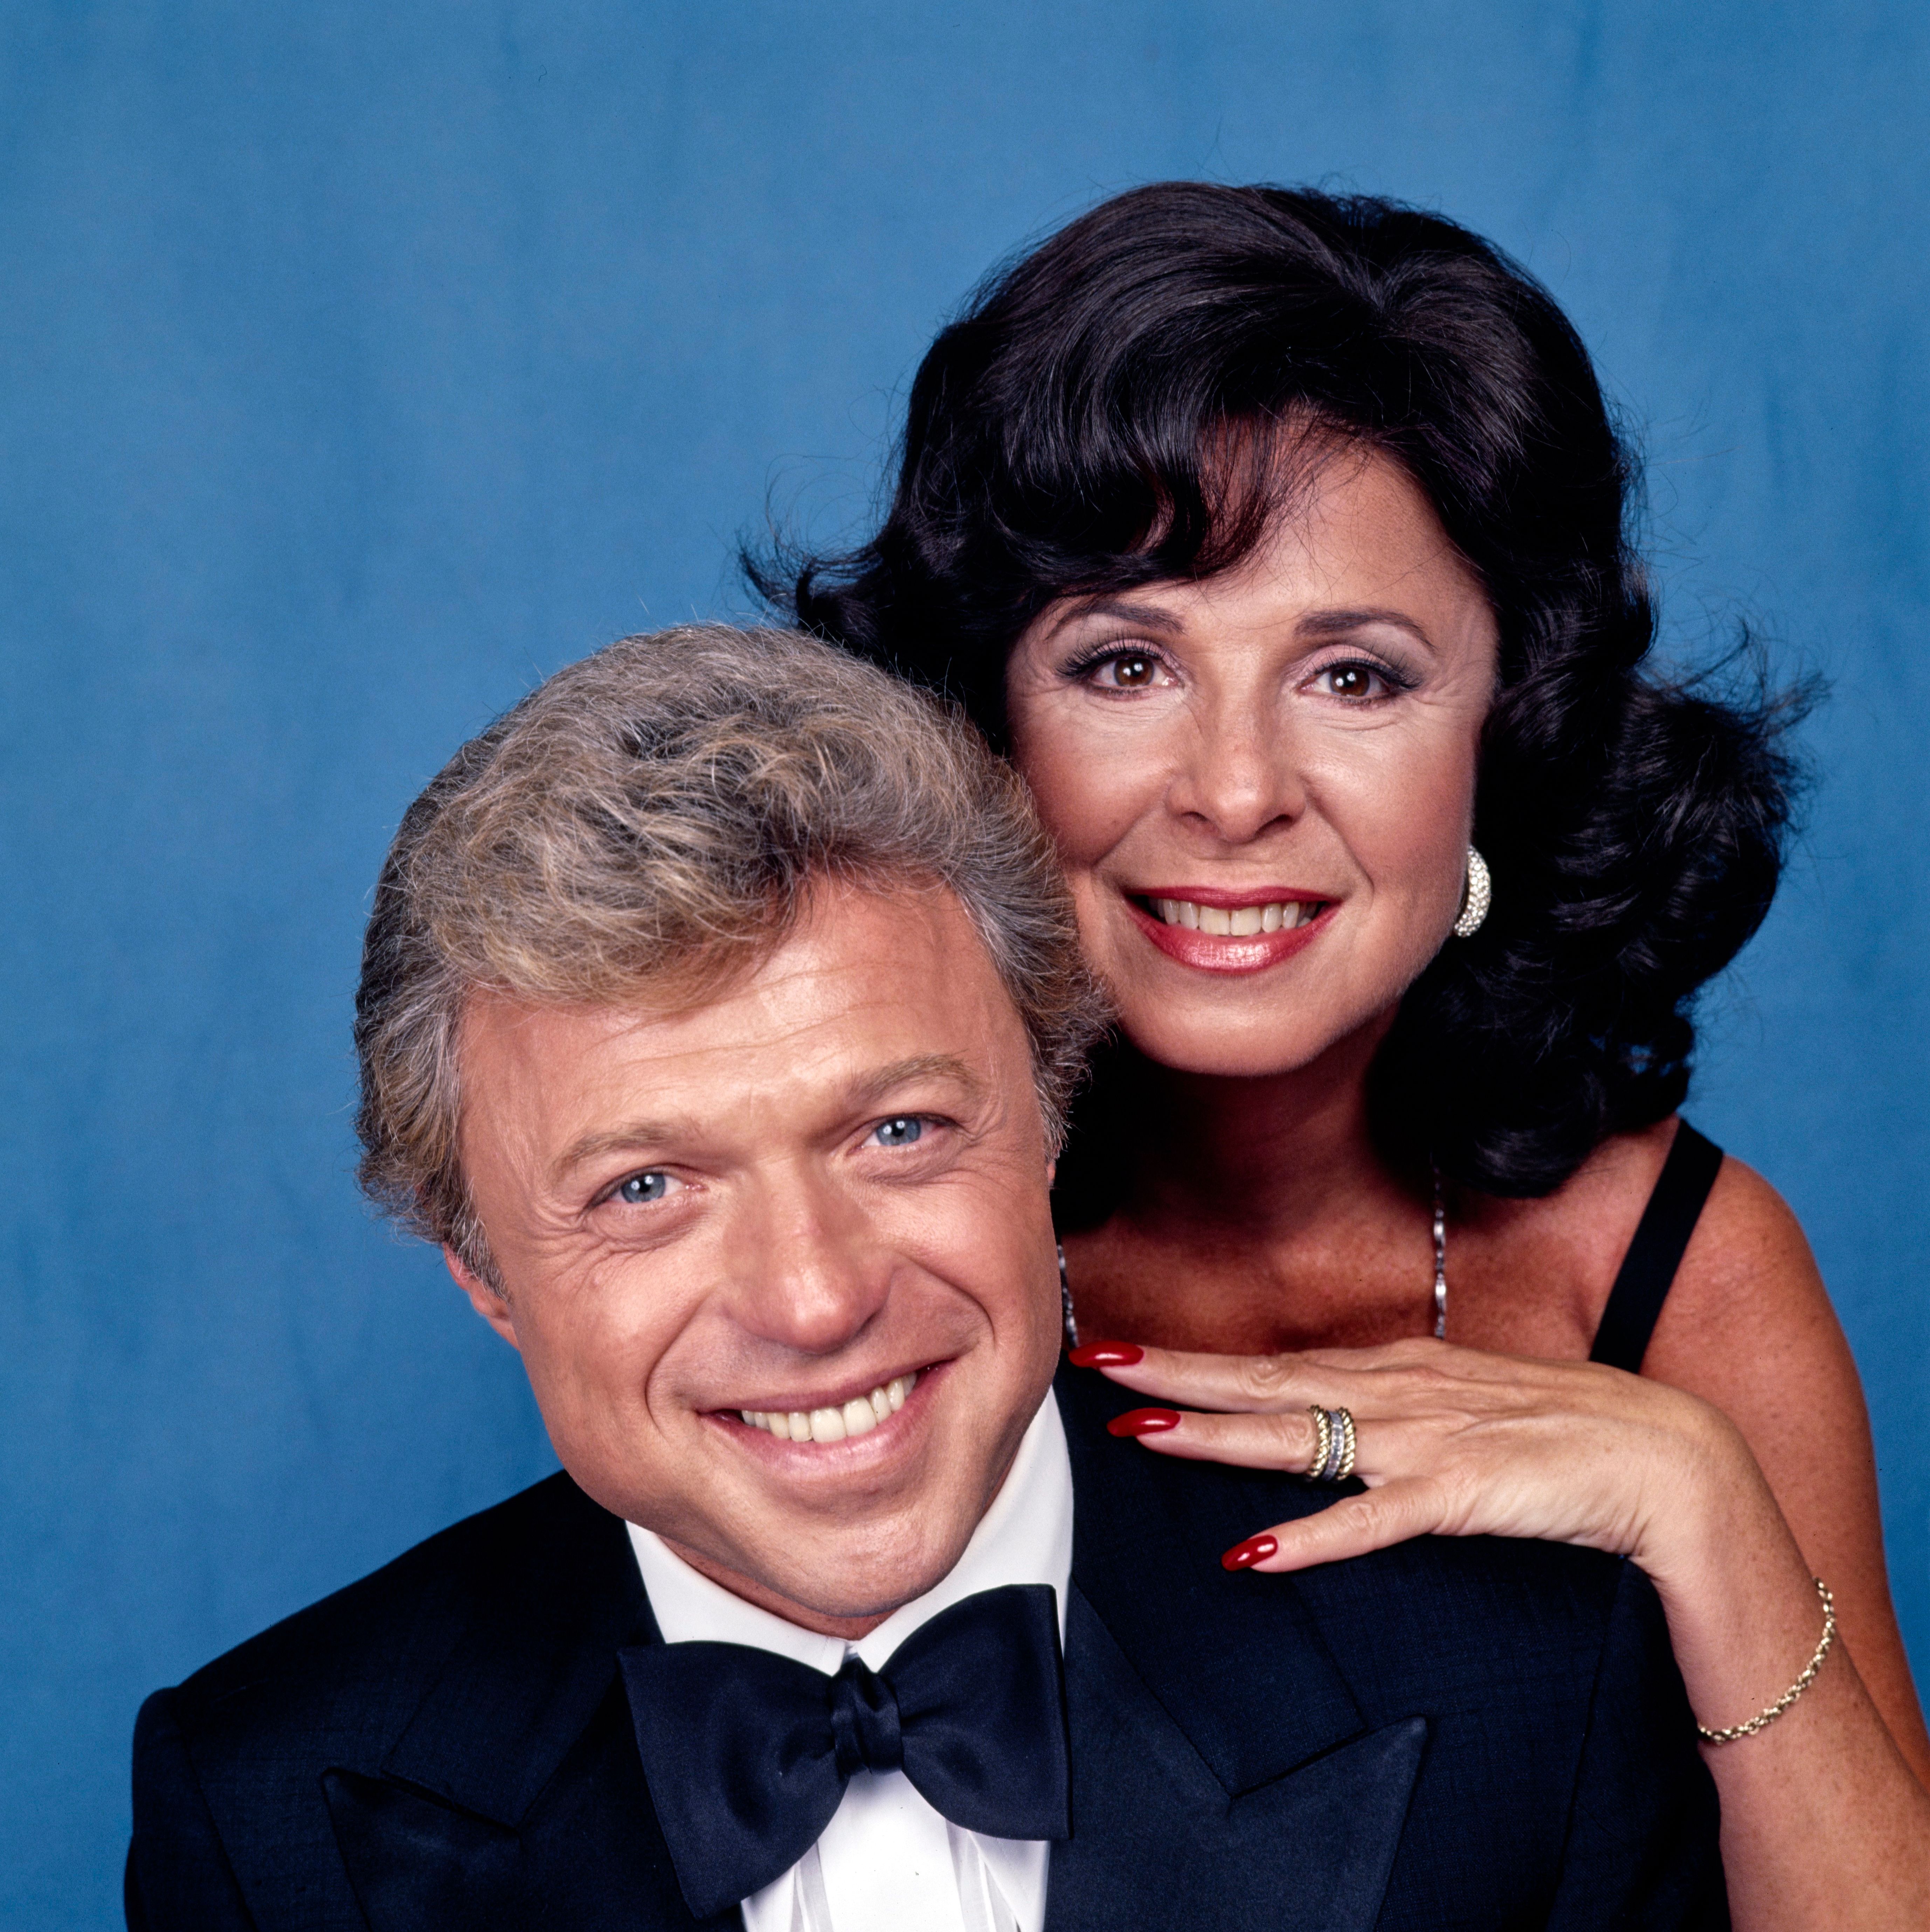 Steve Lawrence and Eydie Gorme at the American Guild of Variety Artists (AGVA) 8th Annual Entertainer of the Year Awards. | Source: Getty Images